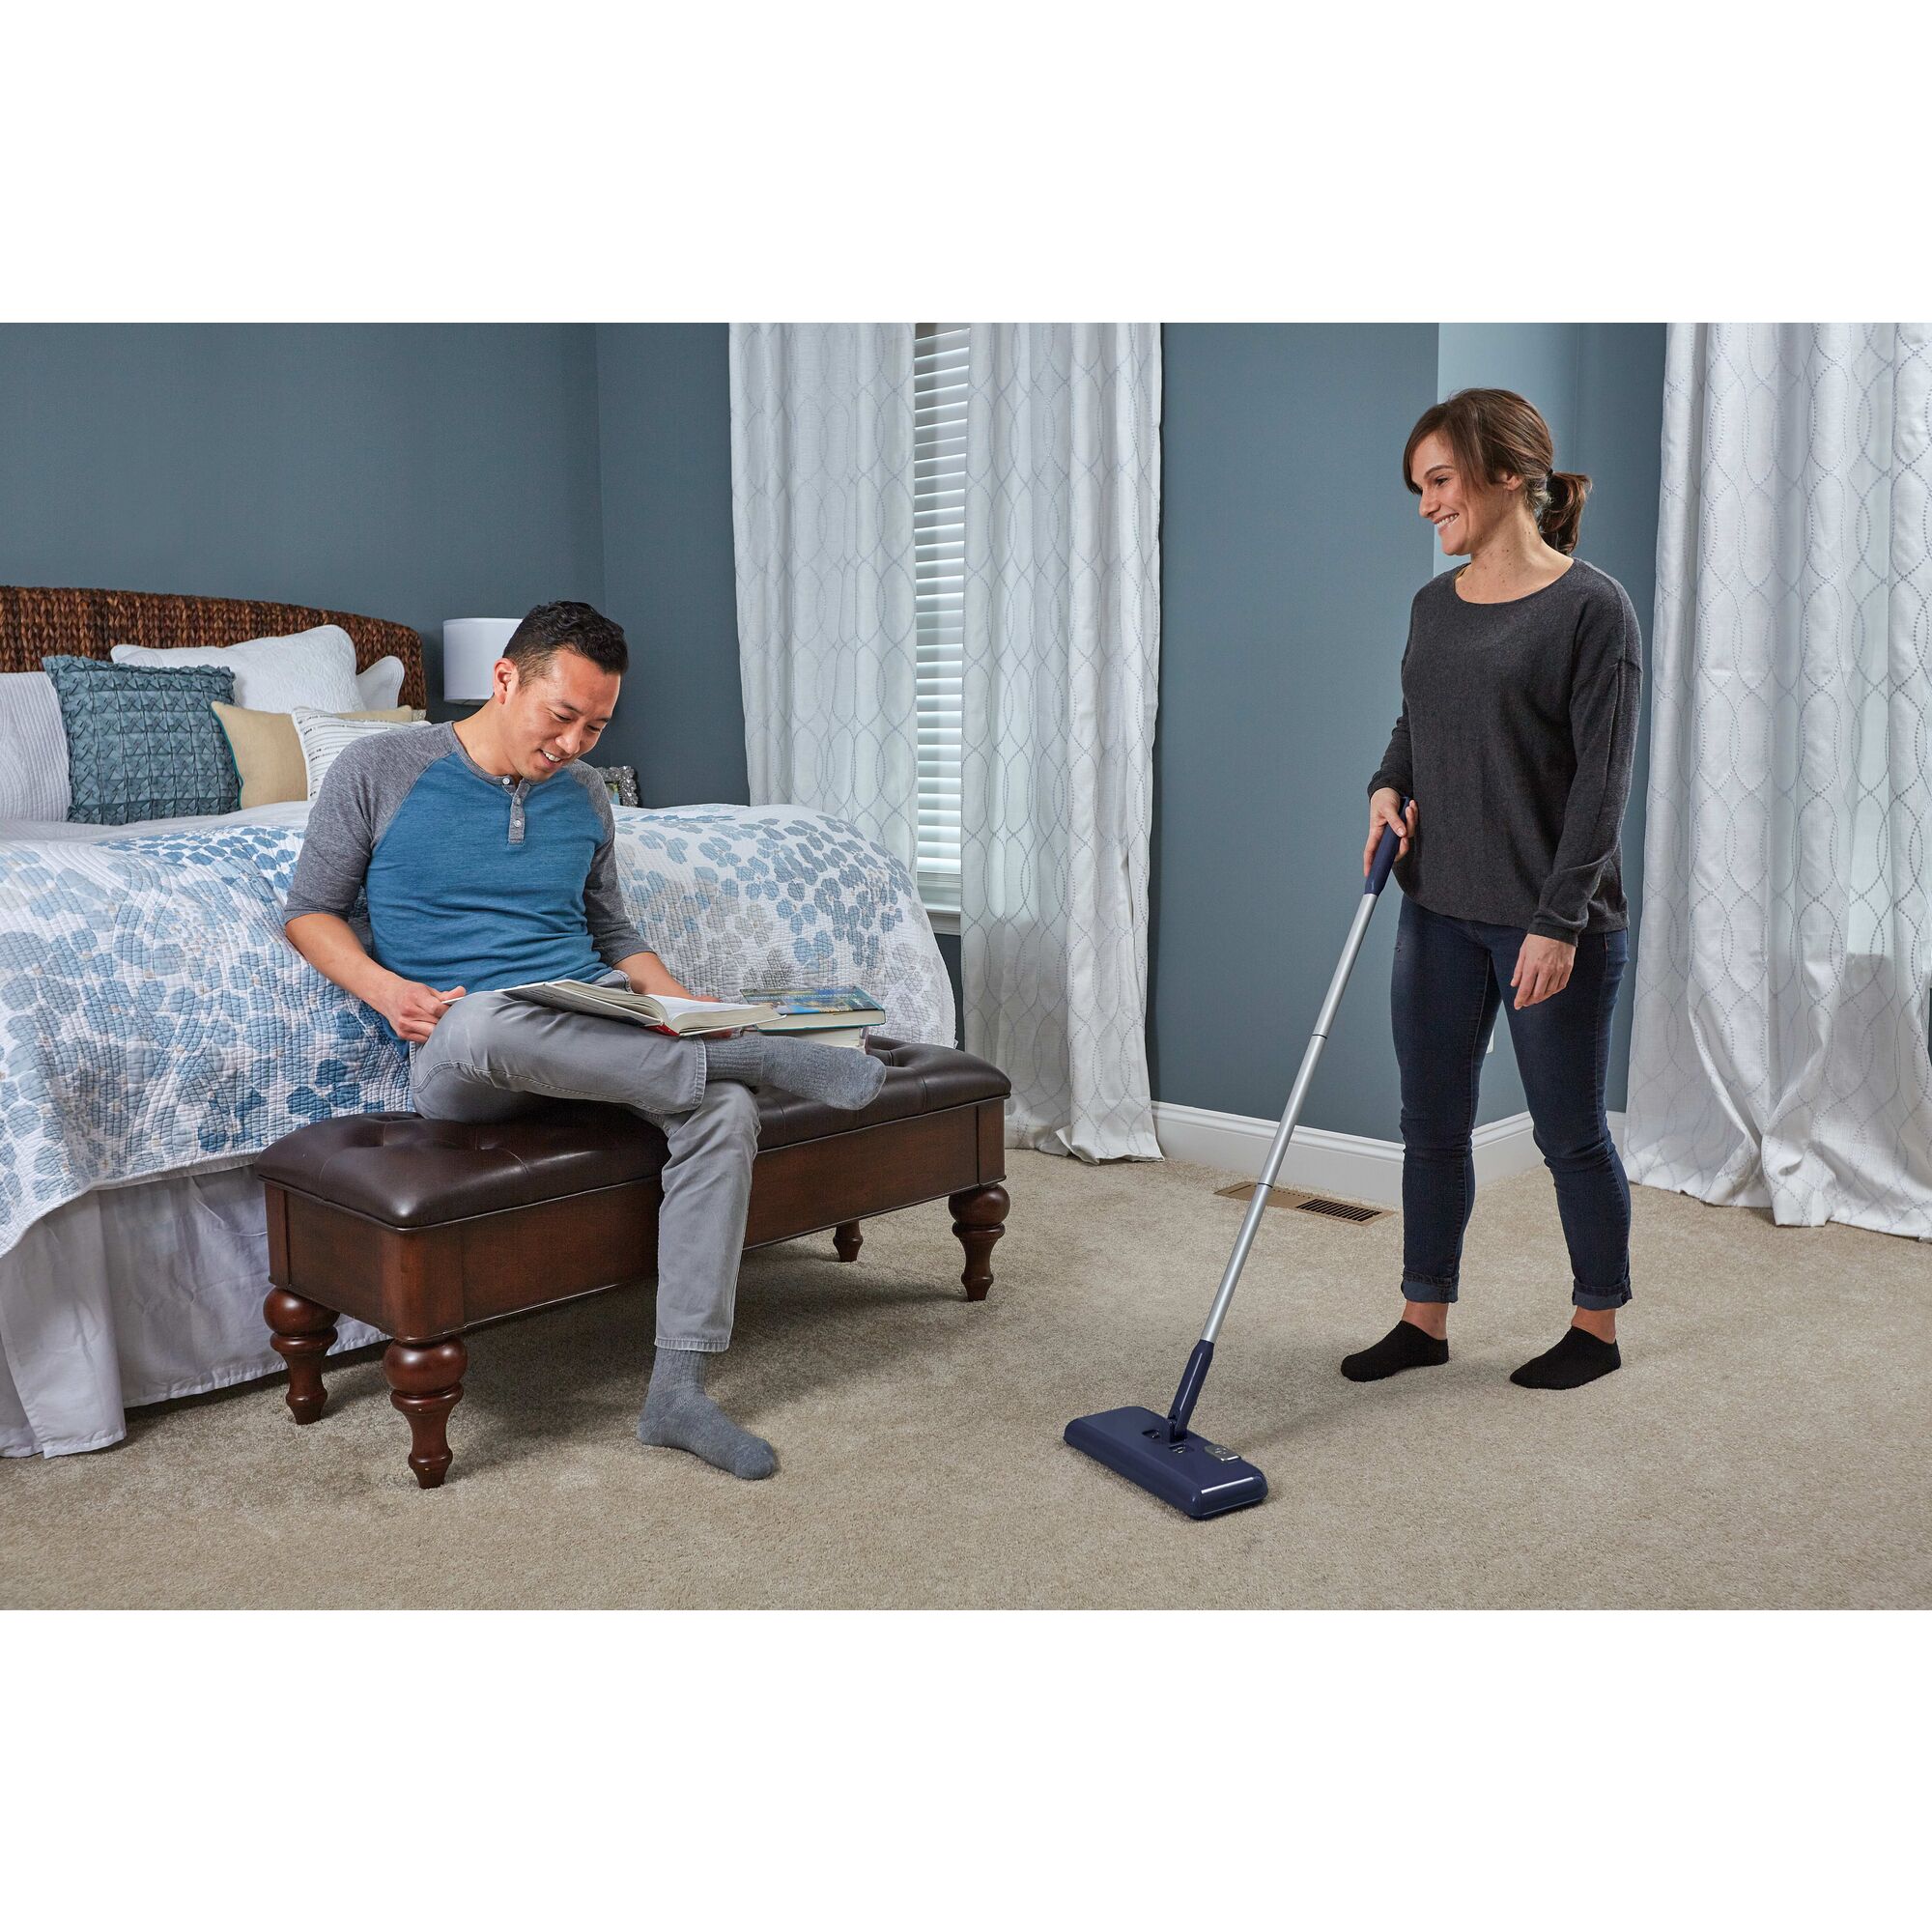 Powered Floor Sweeper being used by person to clean carpet.